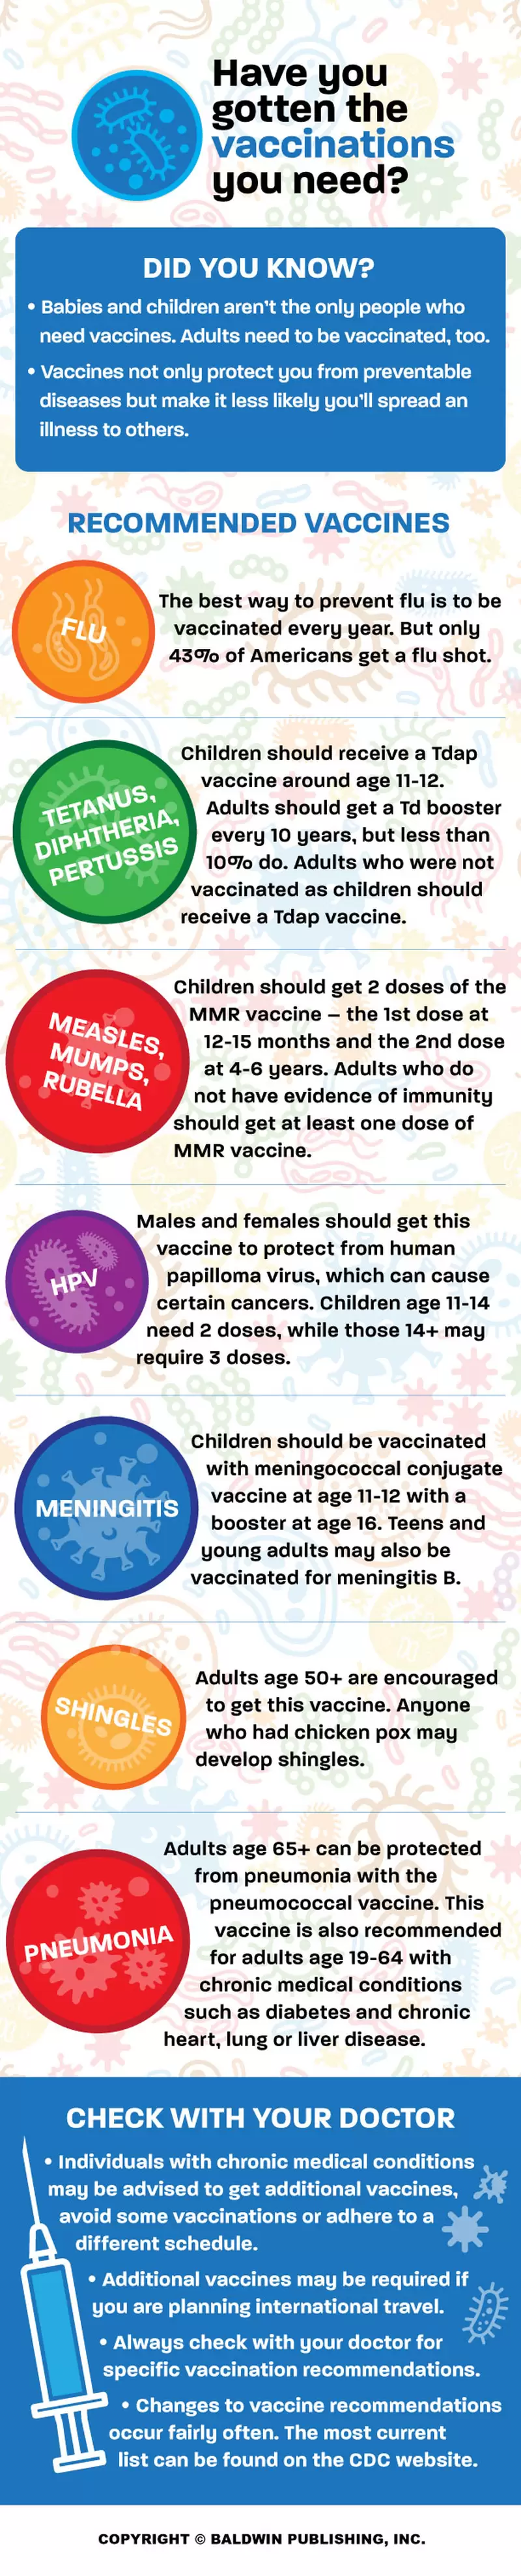 vaccination infographic